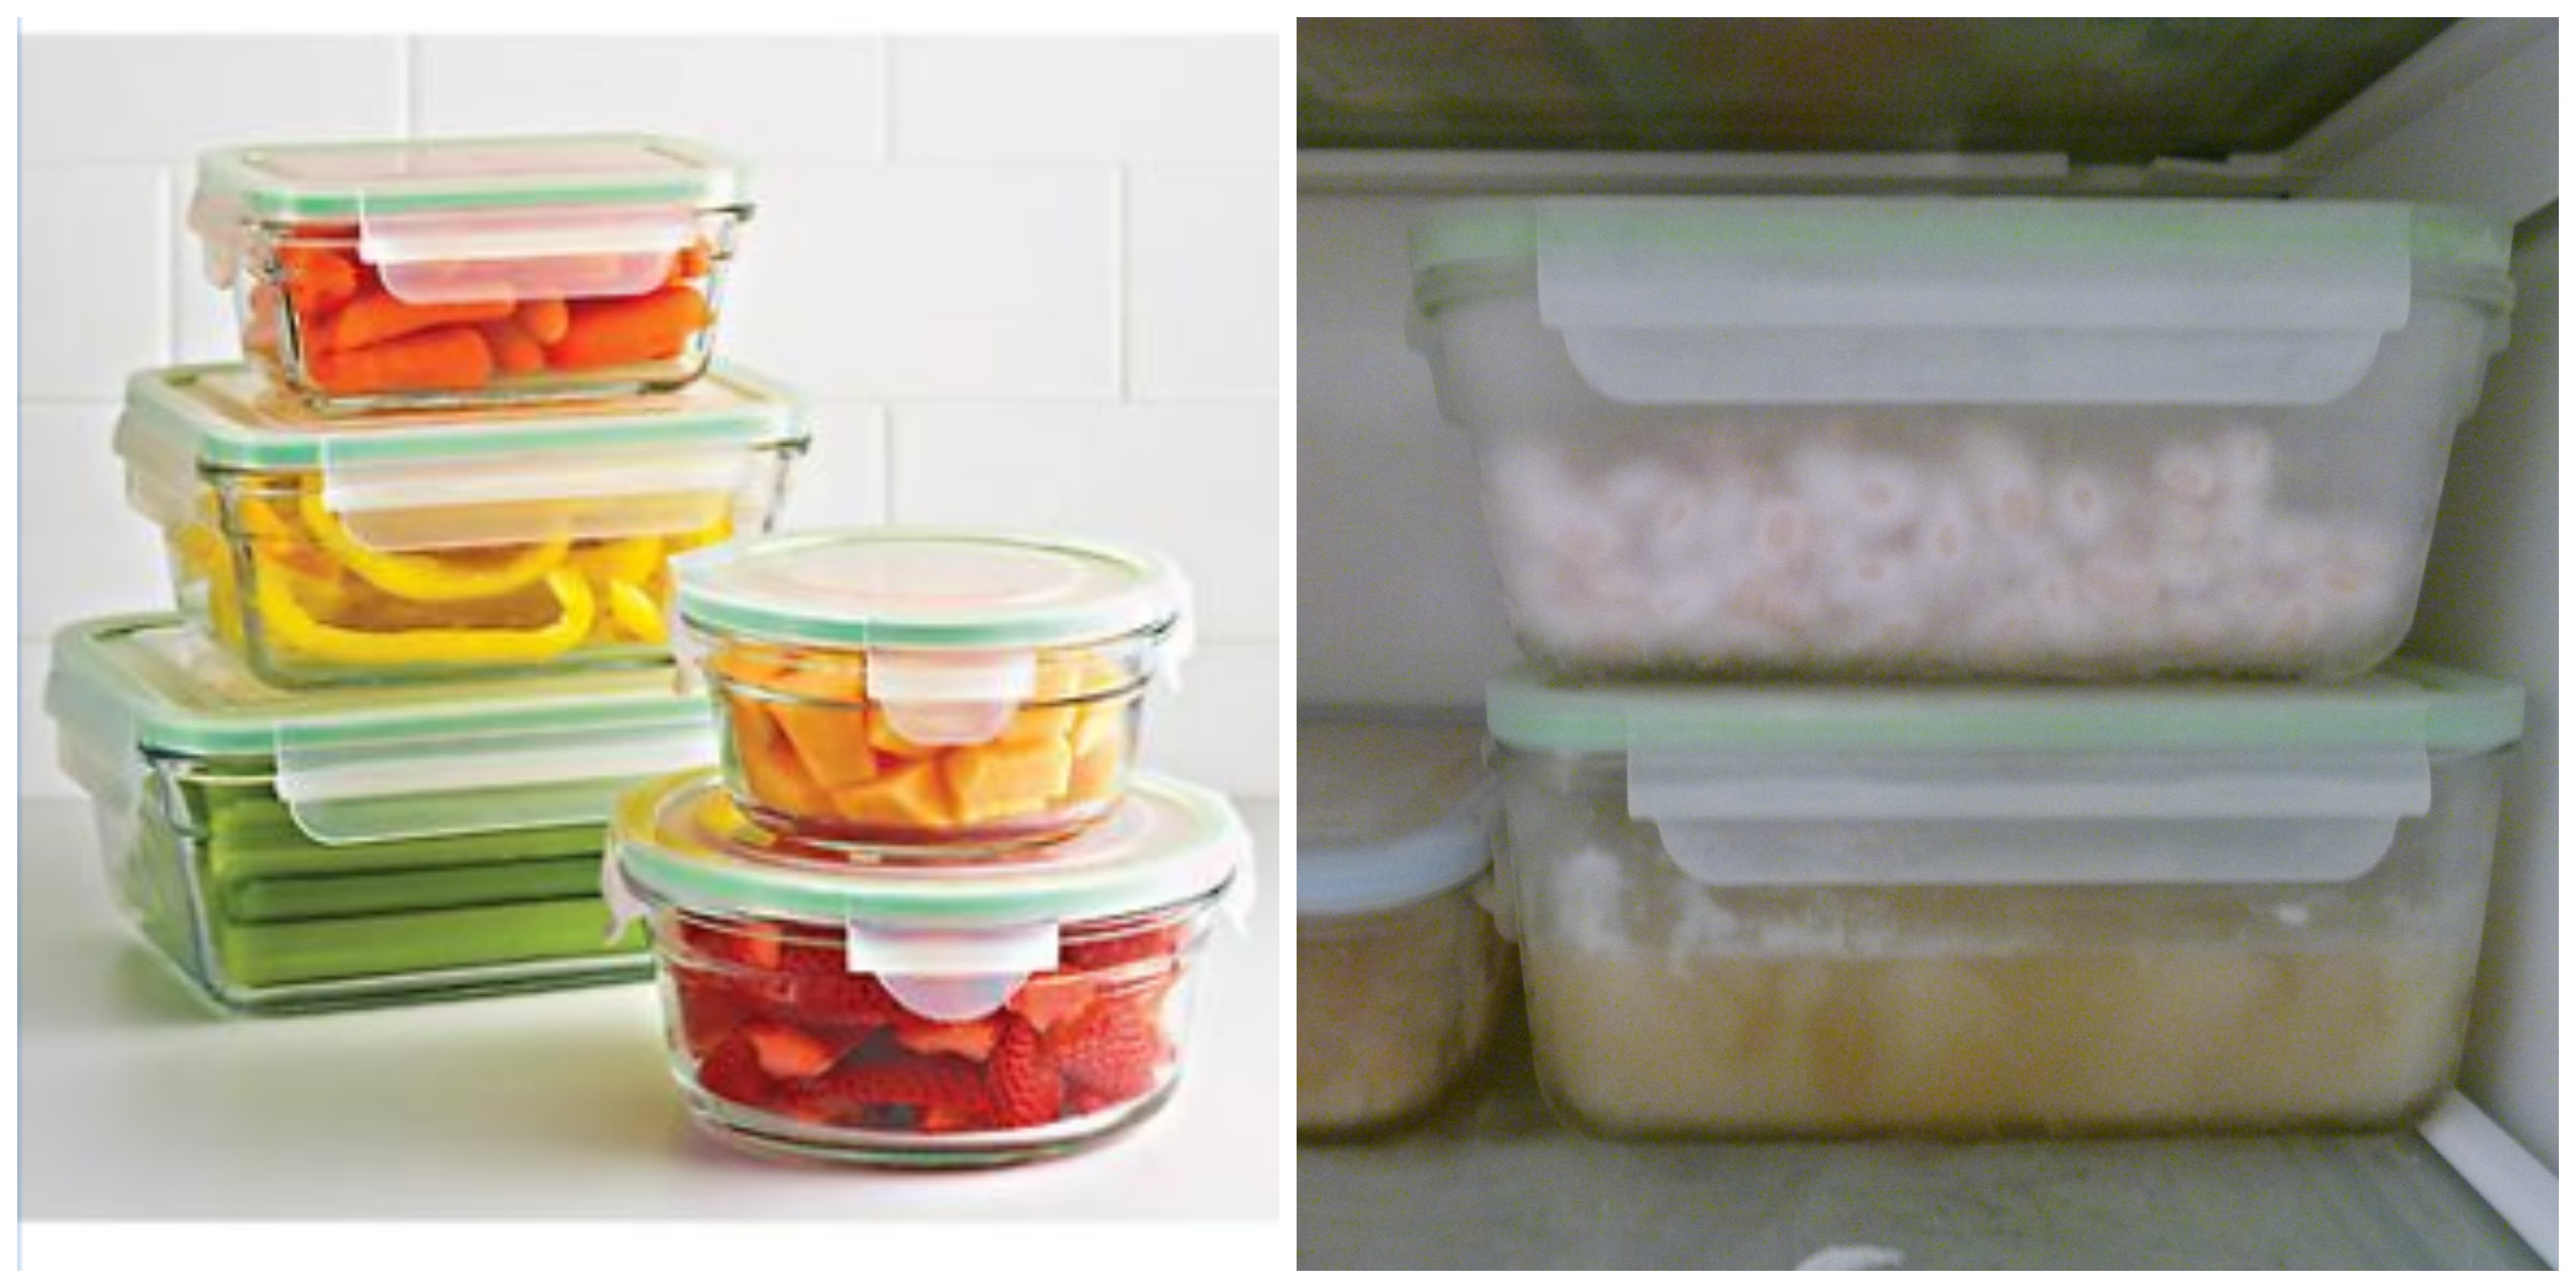 Save on Glad FreezerWare Containers with Lids Small Order Online